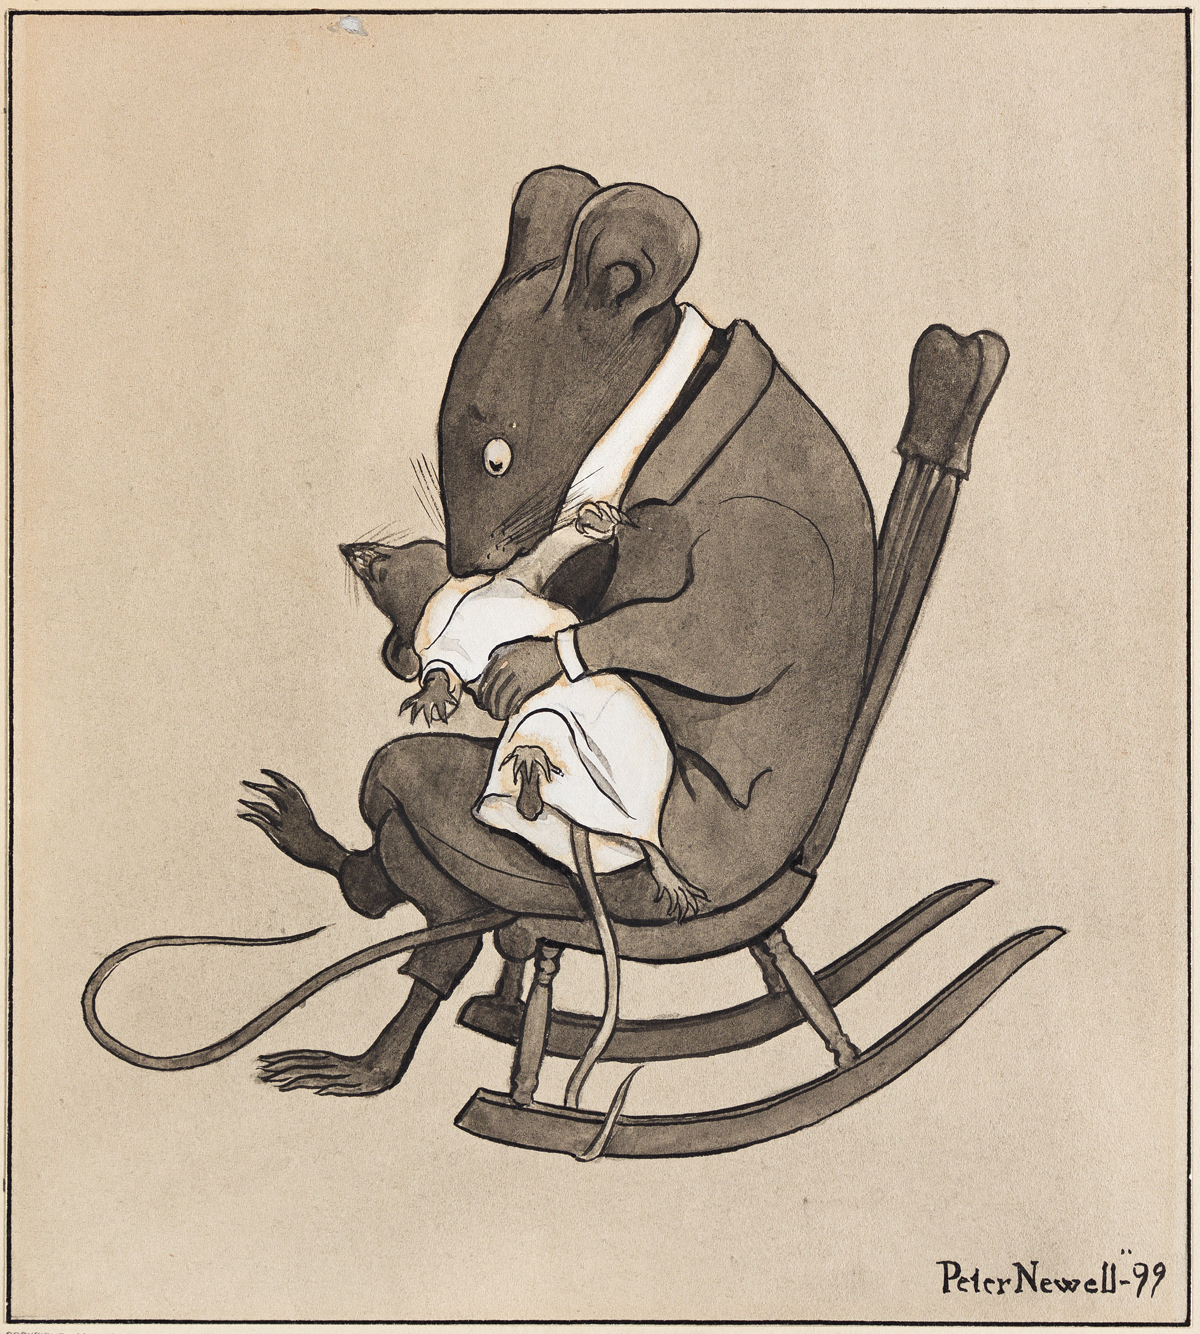 PETER NEWELL (1862-1924) A Careless Father. [CHILDRENS / MOUSE]